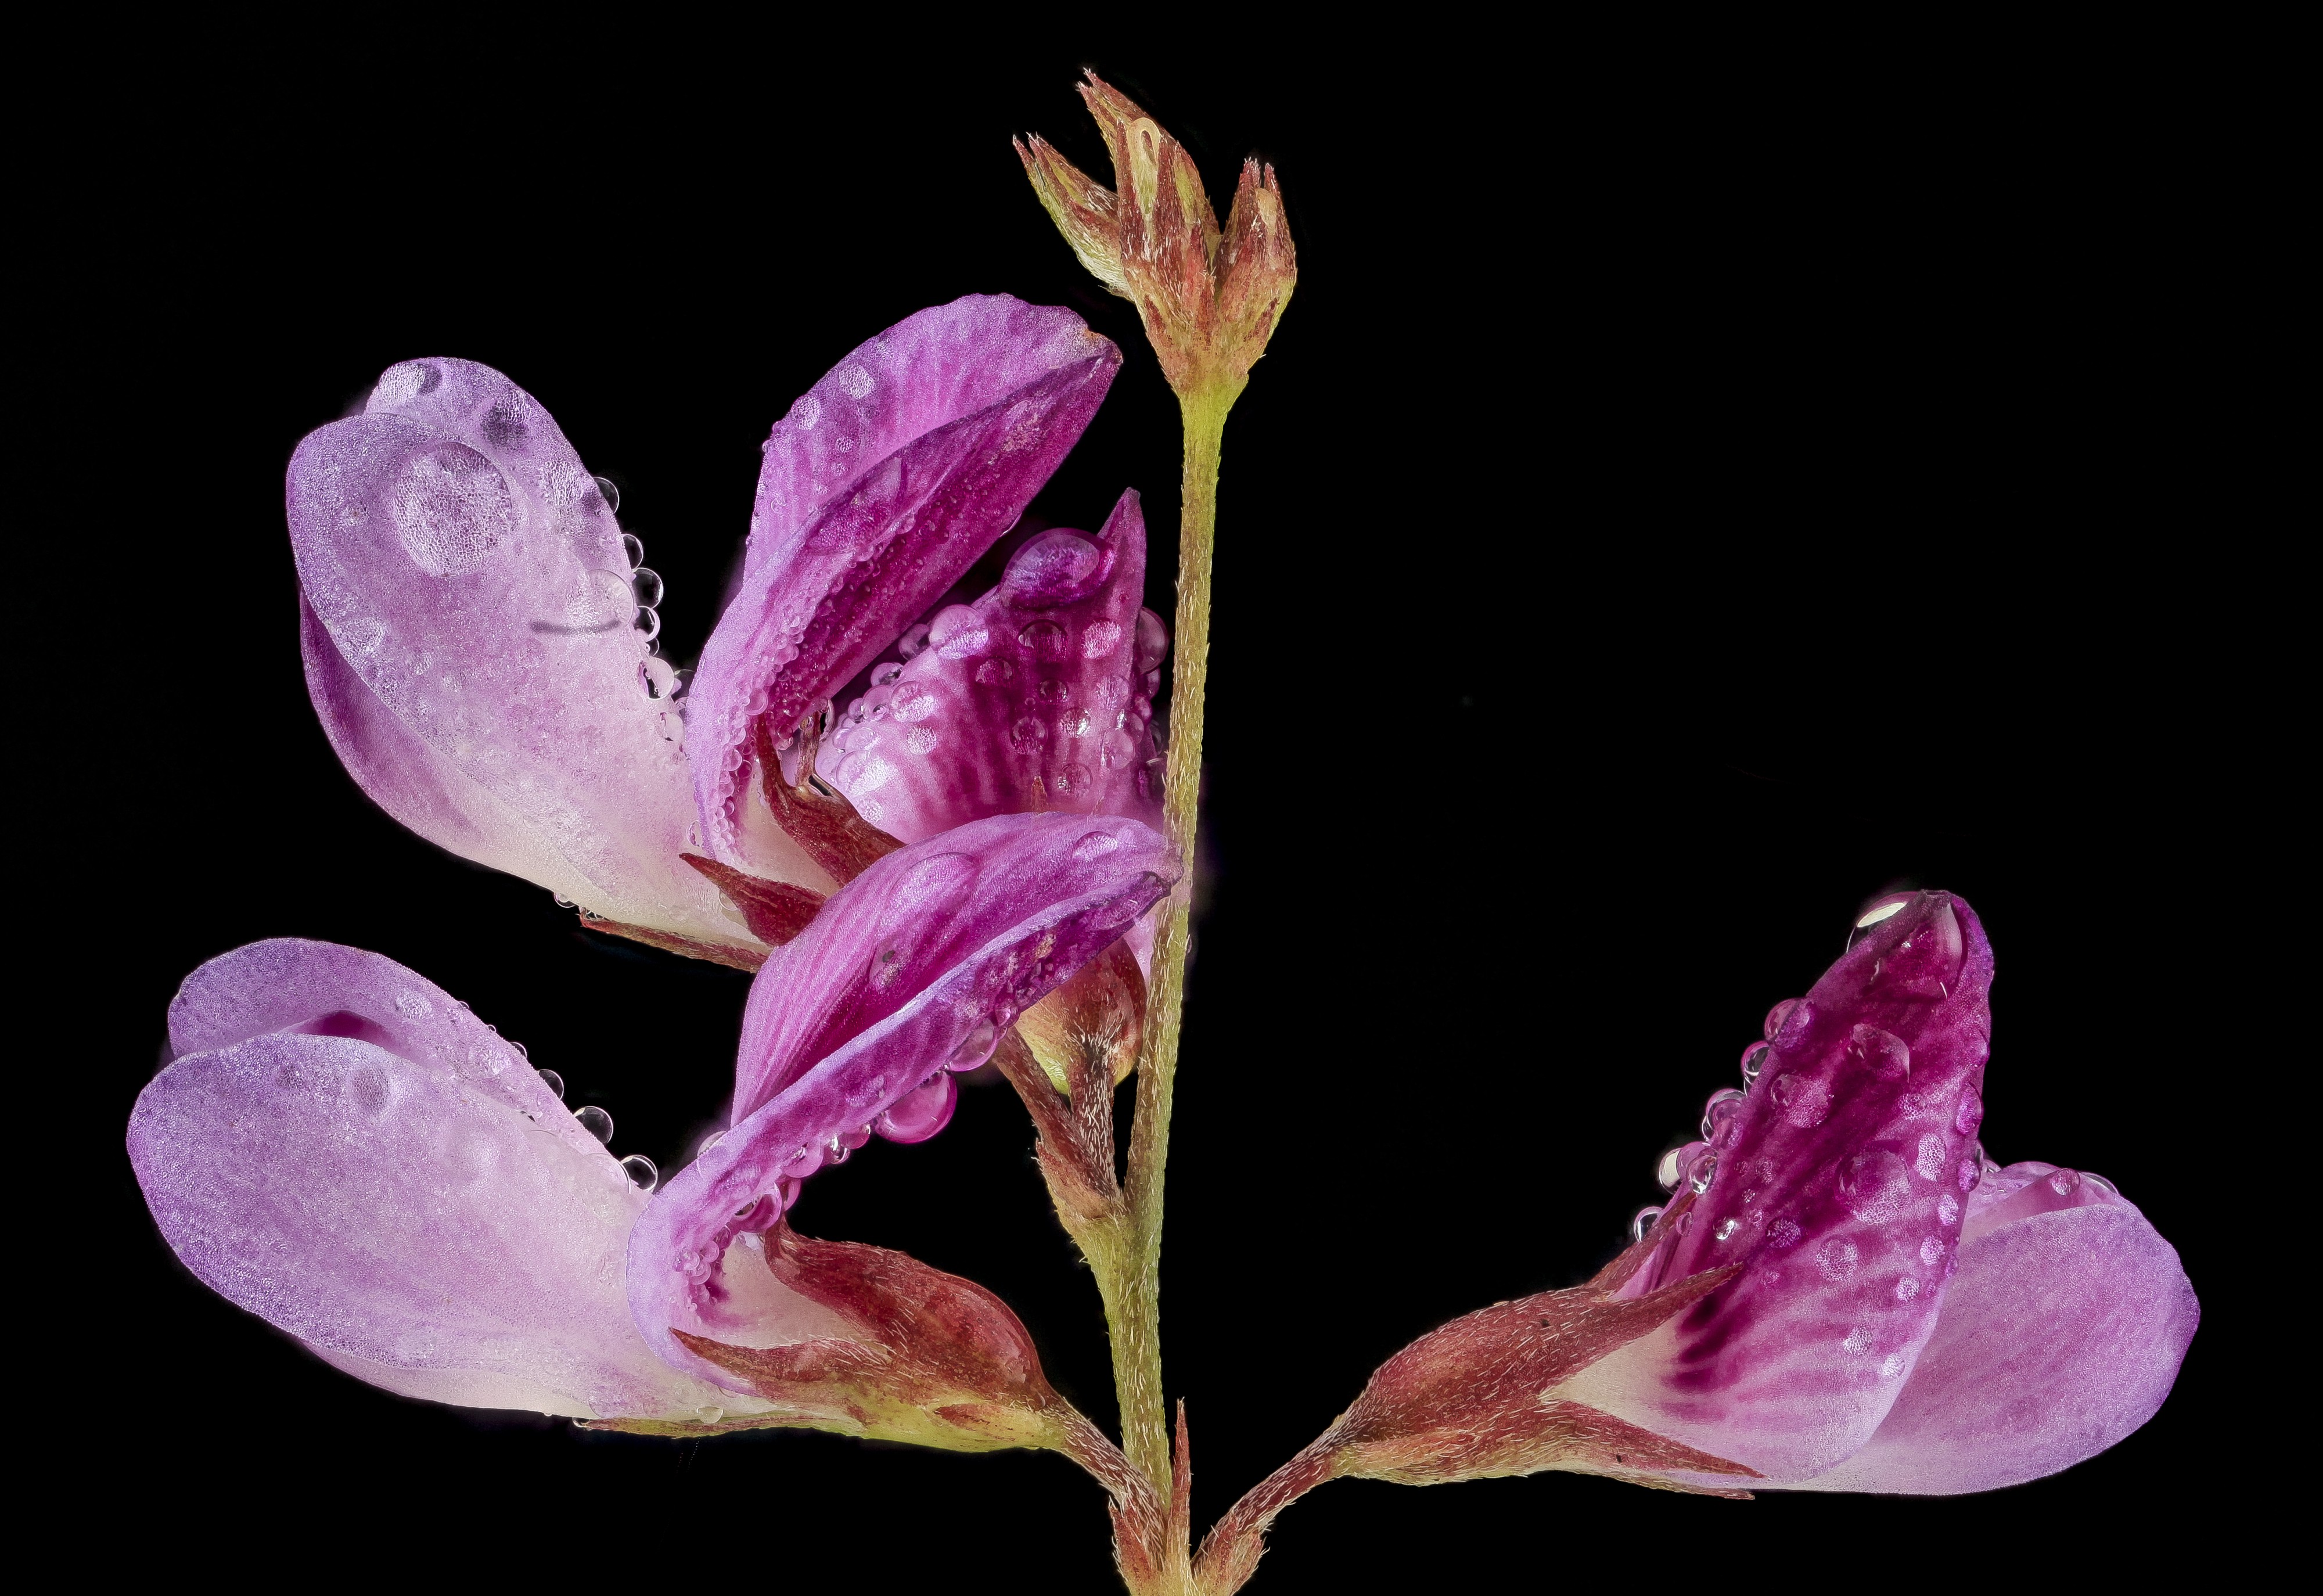 Ticktrefoil flower with dew, MD, PG County 2013-08-20-12.44.12 ZS PMax (9557945702)